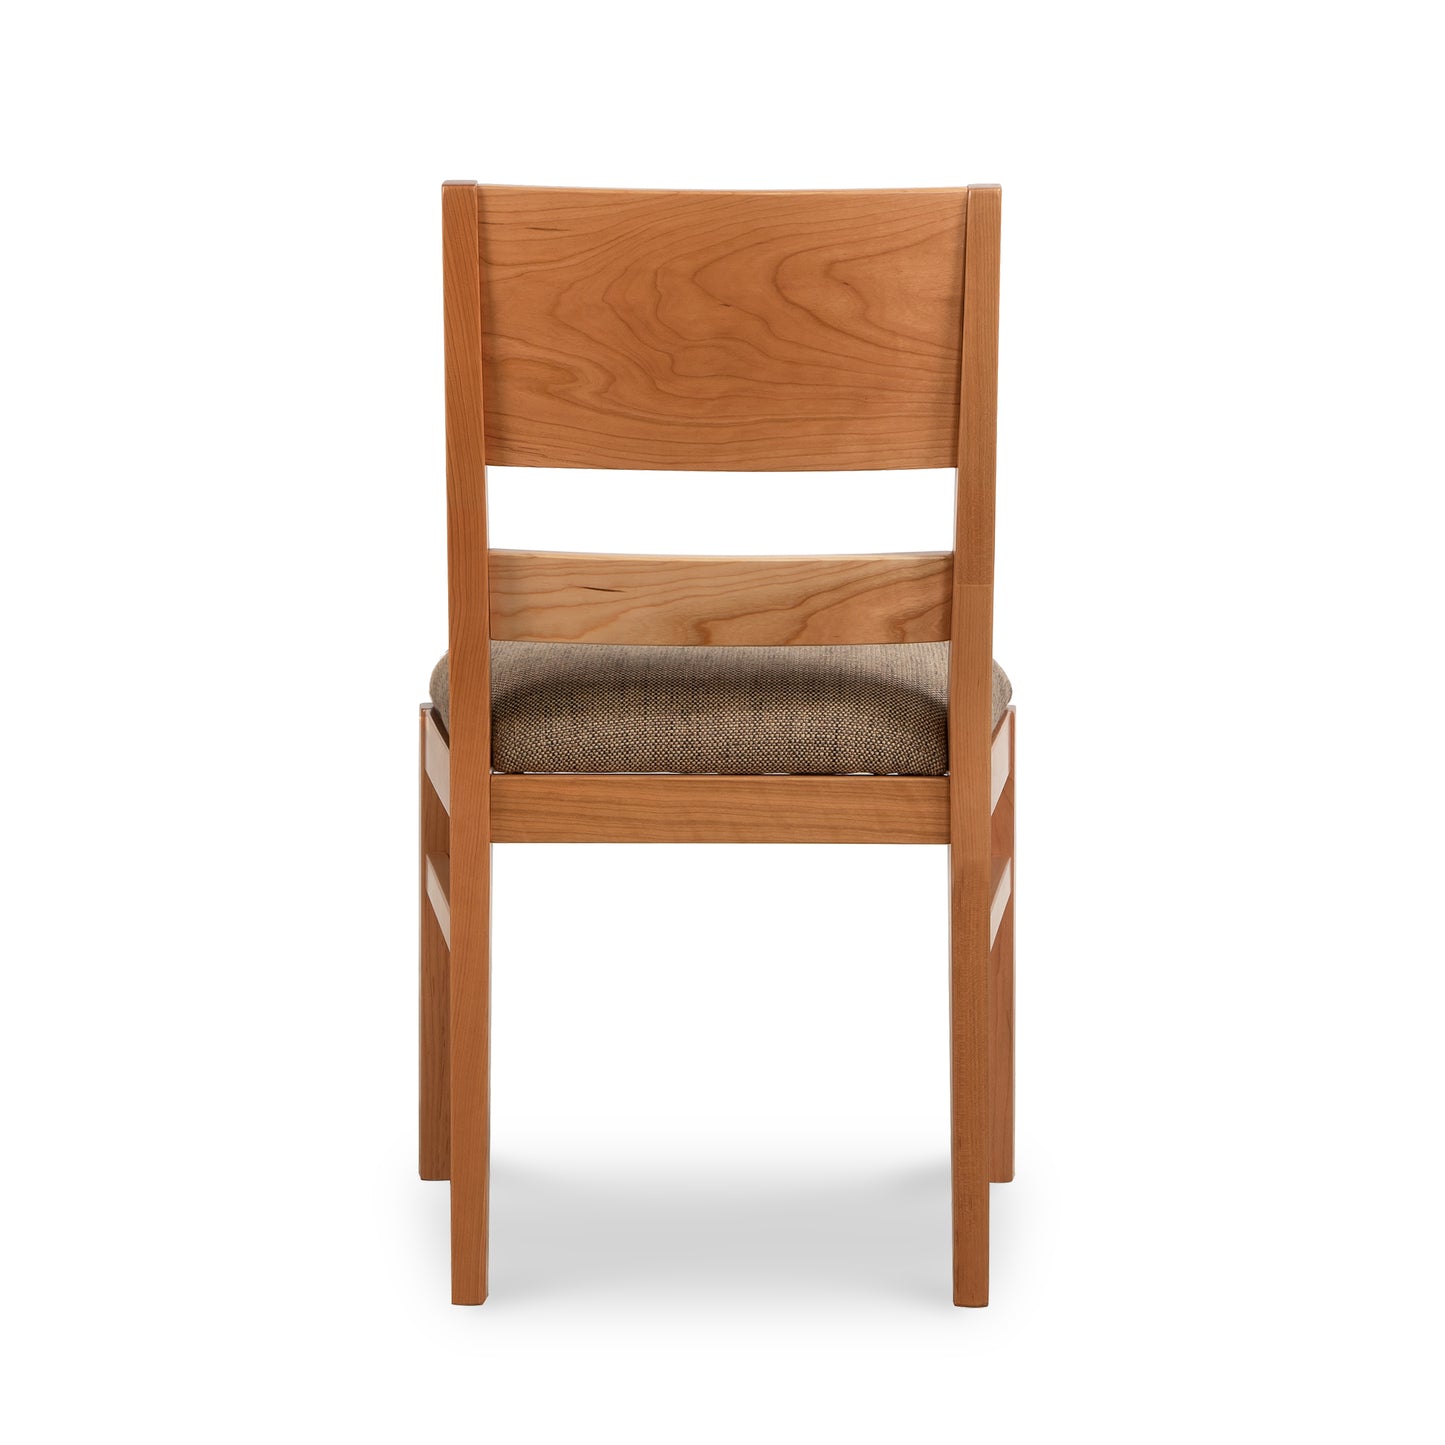 A wooden dining chair with a tan seat.